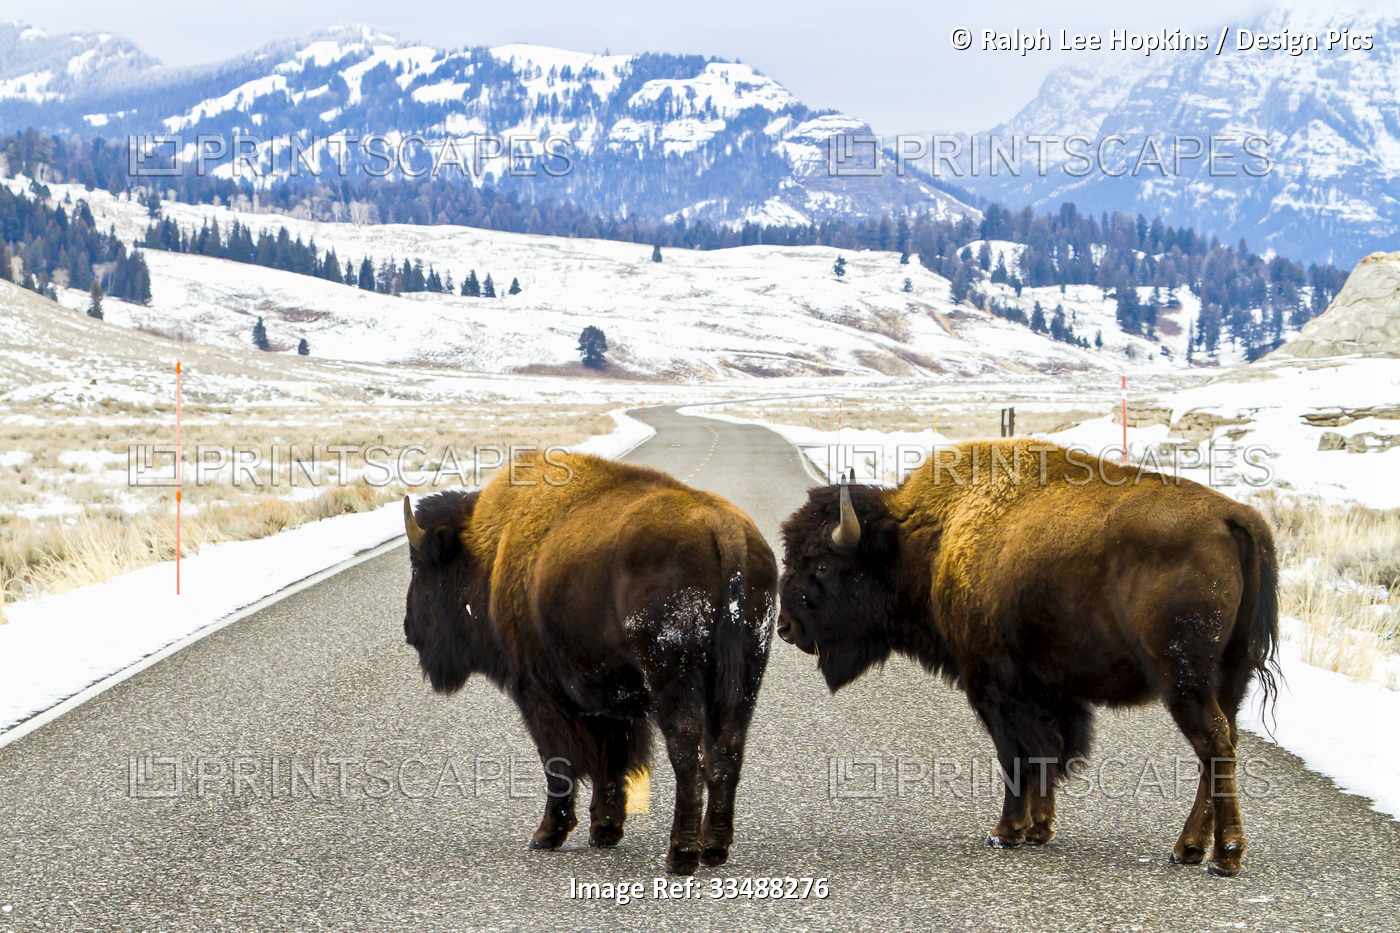 Two buffalo cross a paved road in winter.